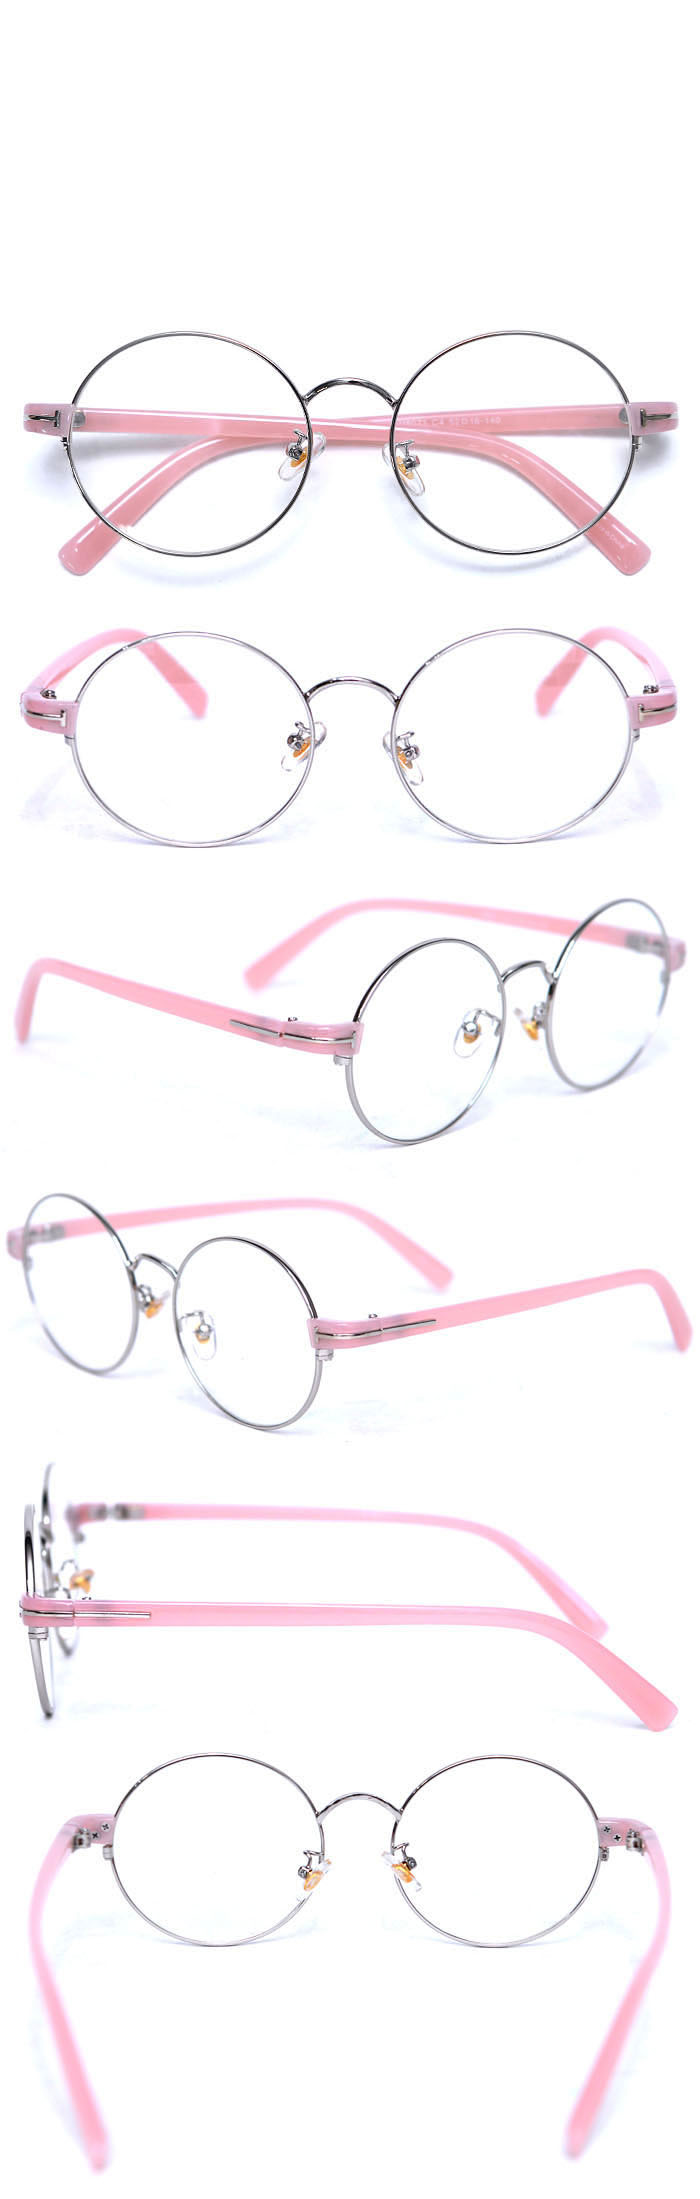 Accessories :: Sunglasses & Glasses :: Chic Gold Accent Rounded-Glasses 31